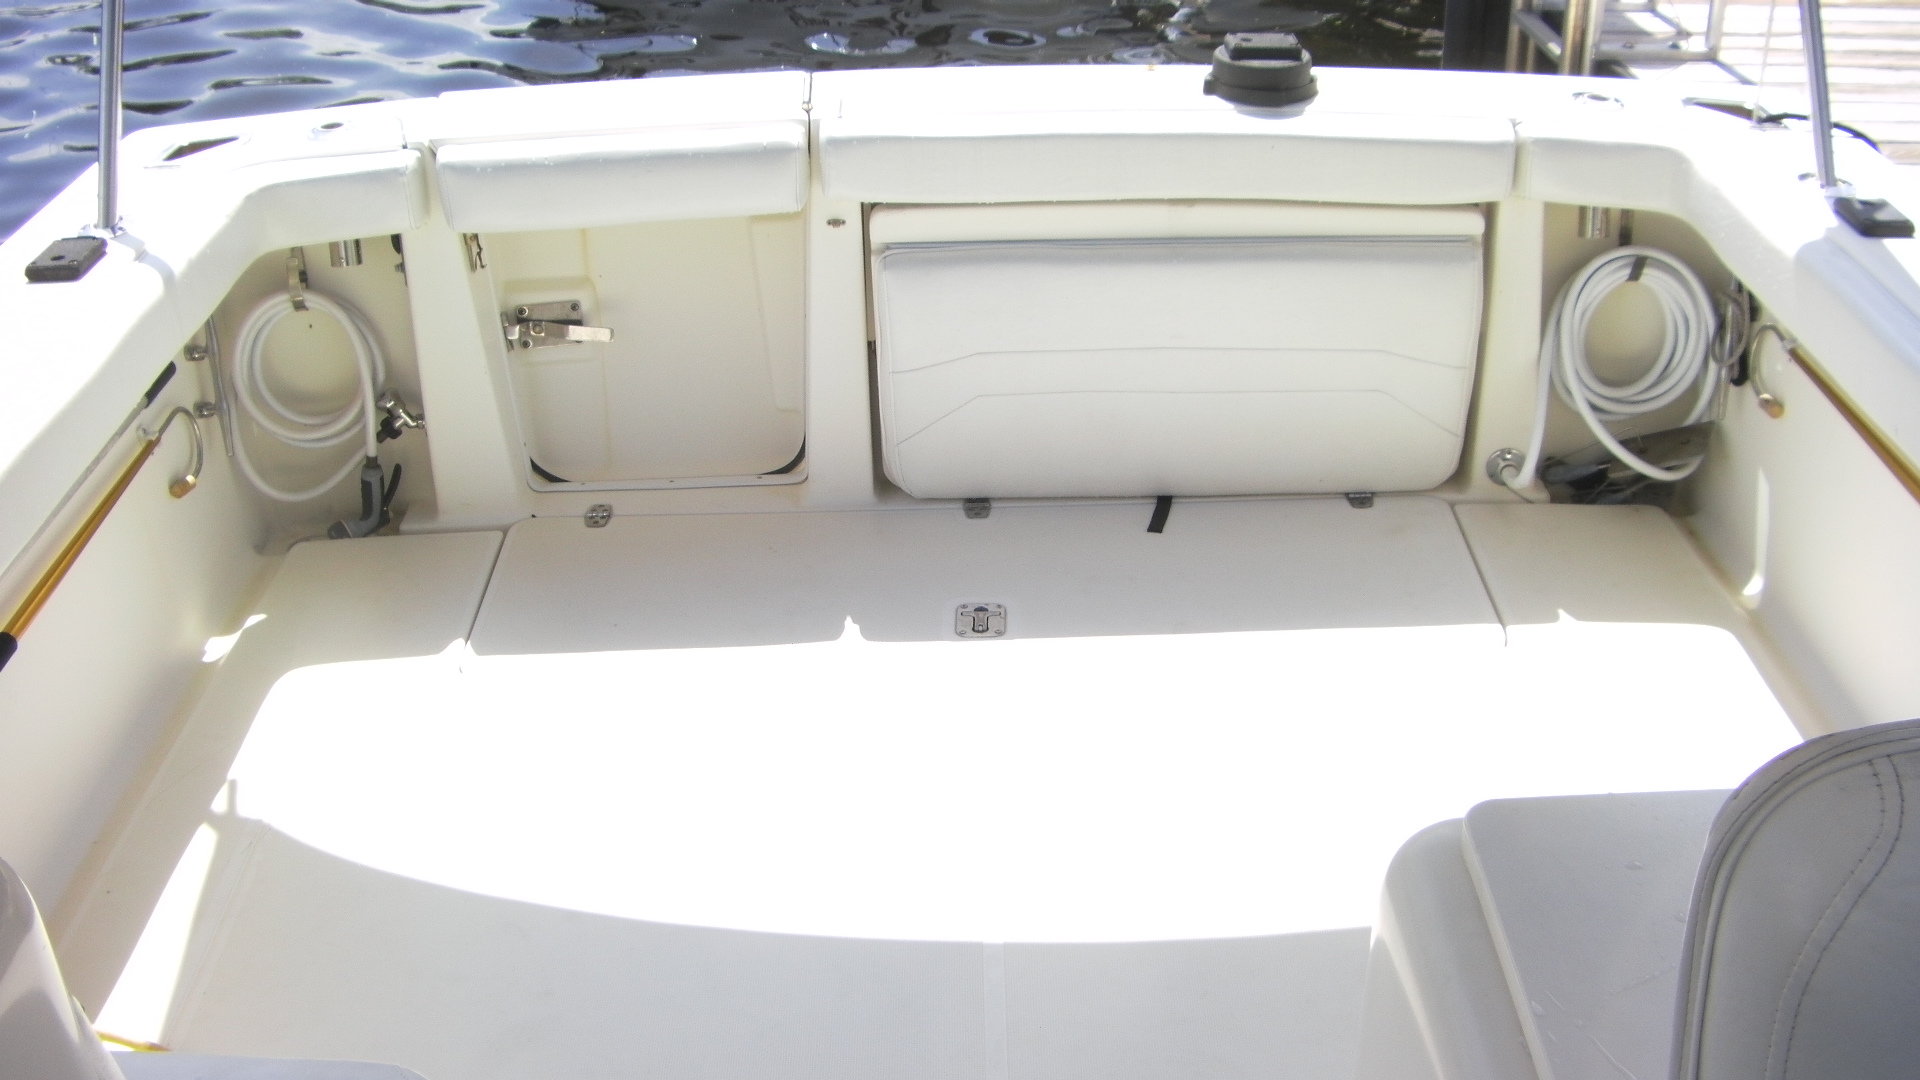 Pros and cons 36-43 express with inboard or outboards? - Page 2